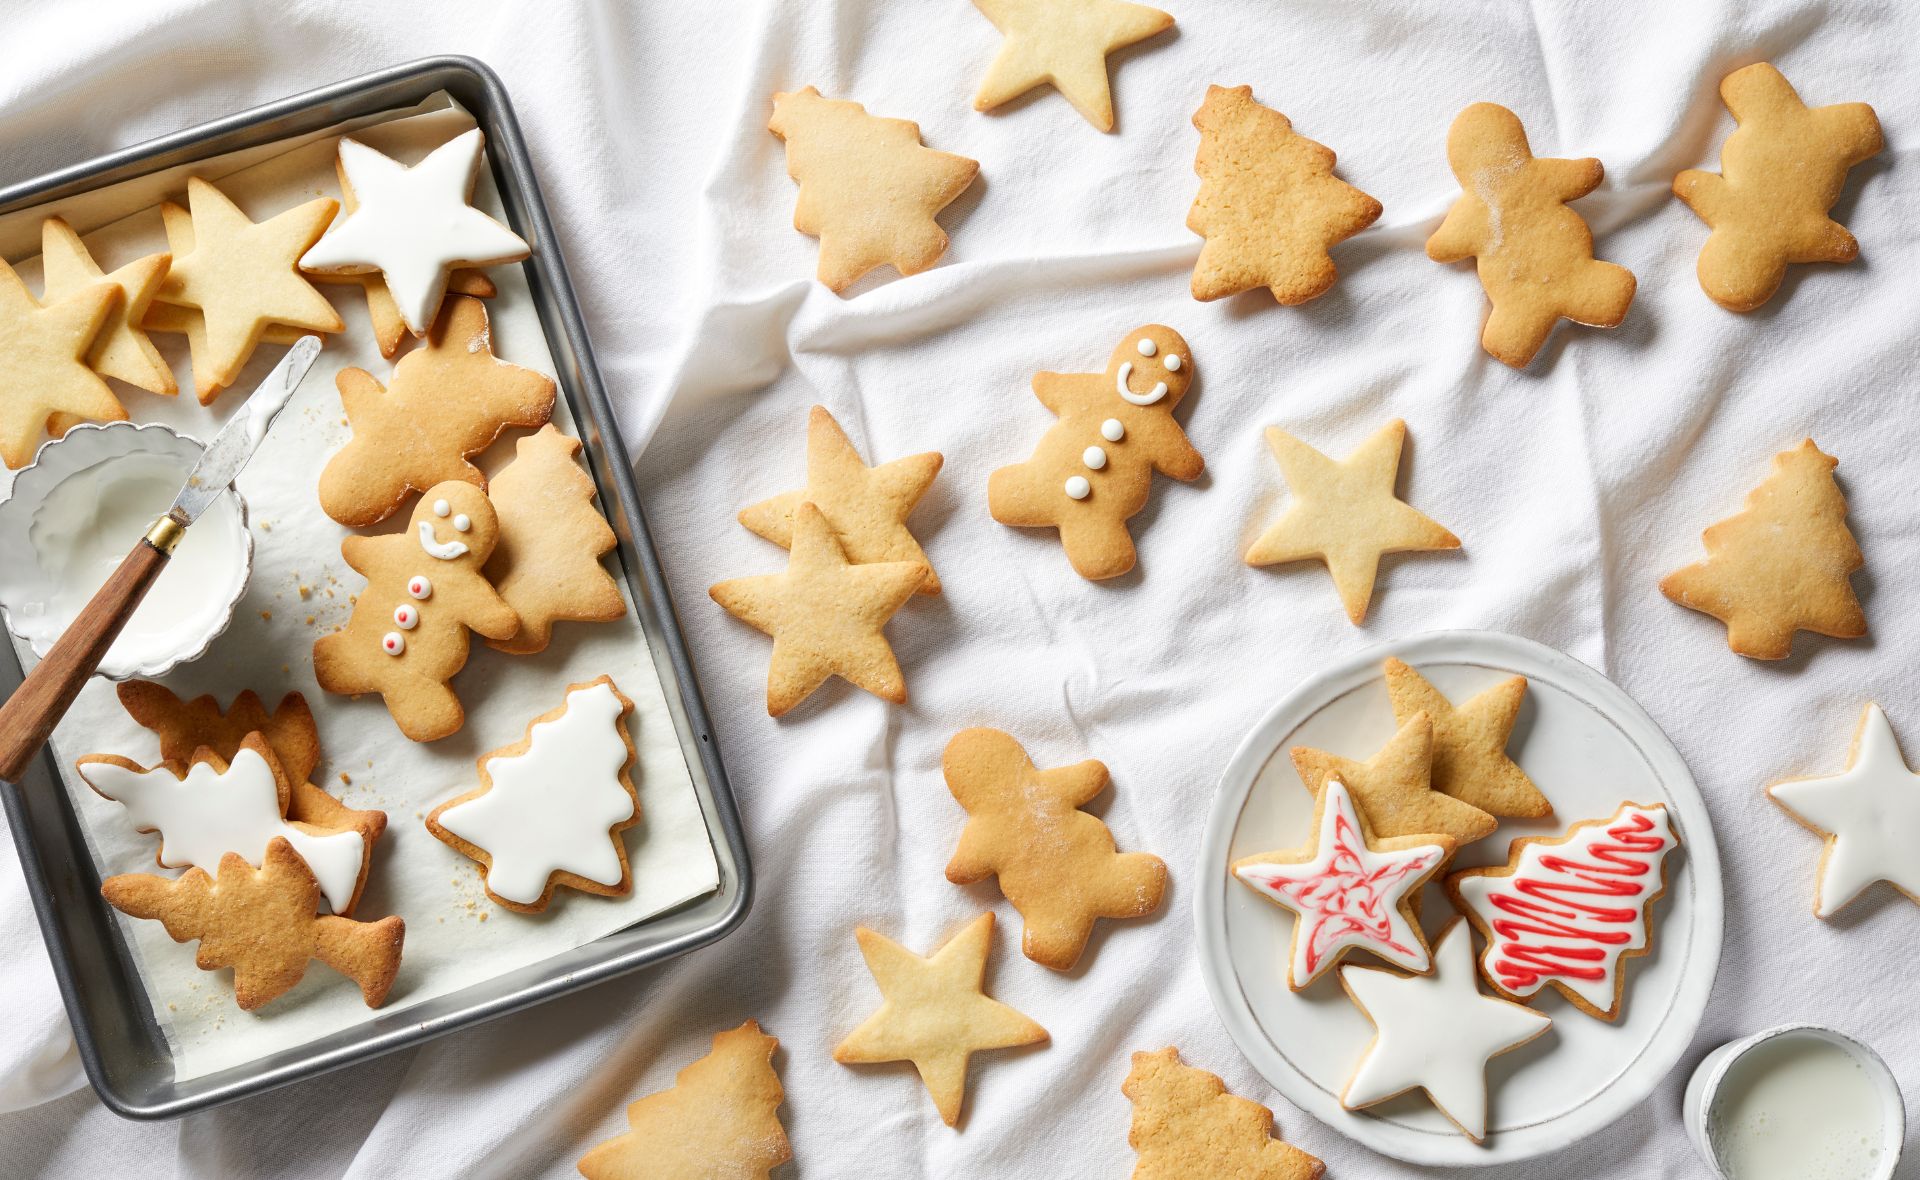 These are the best Christmas cookie cutters on the market